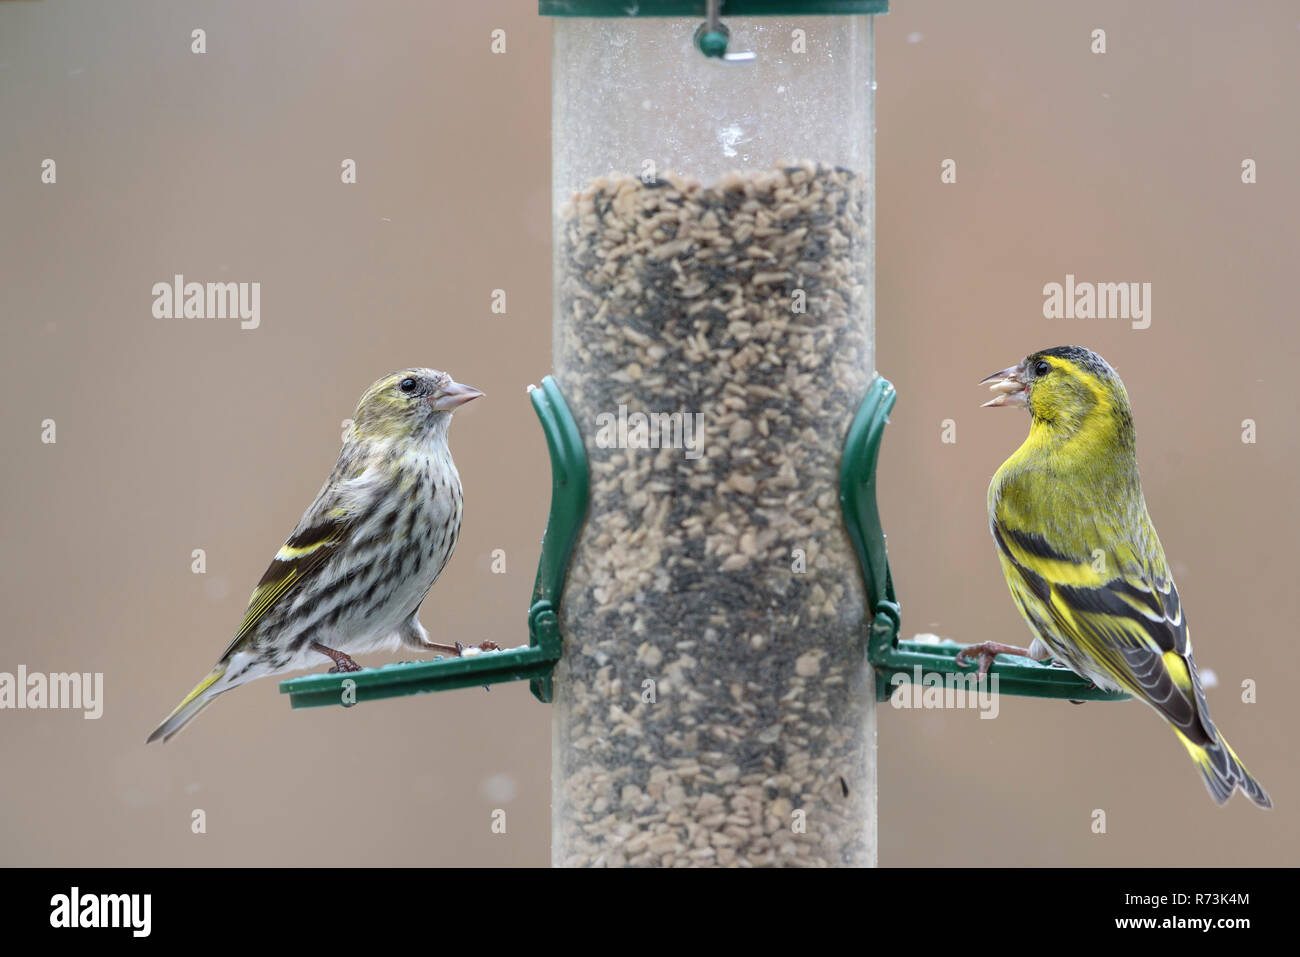 Male and female common siskins, at birdfeeder, Lower Saxony, Germany, (Spinus spinus) Stock Photo